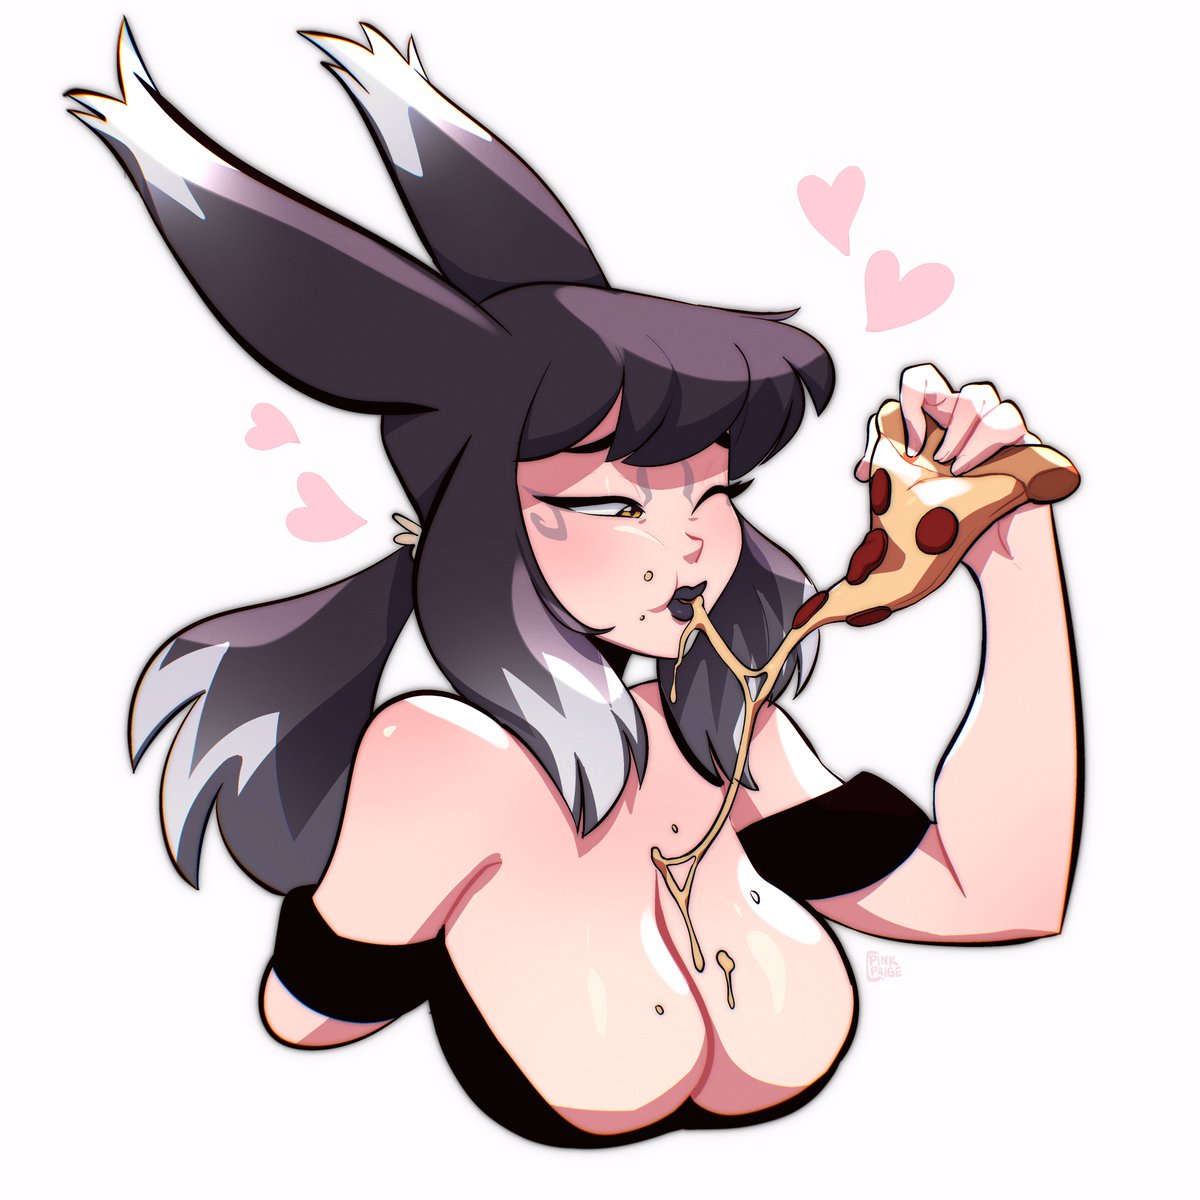 Yeah, I got the Grub Hub pizza eat emote! Ty @PinkCheekPaige for taking my commission!